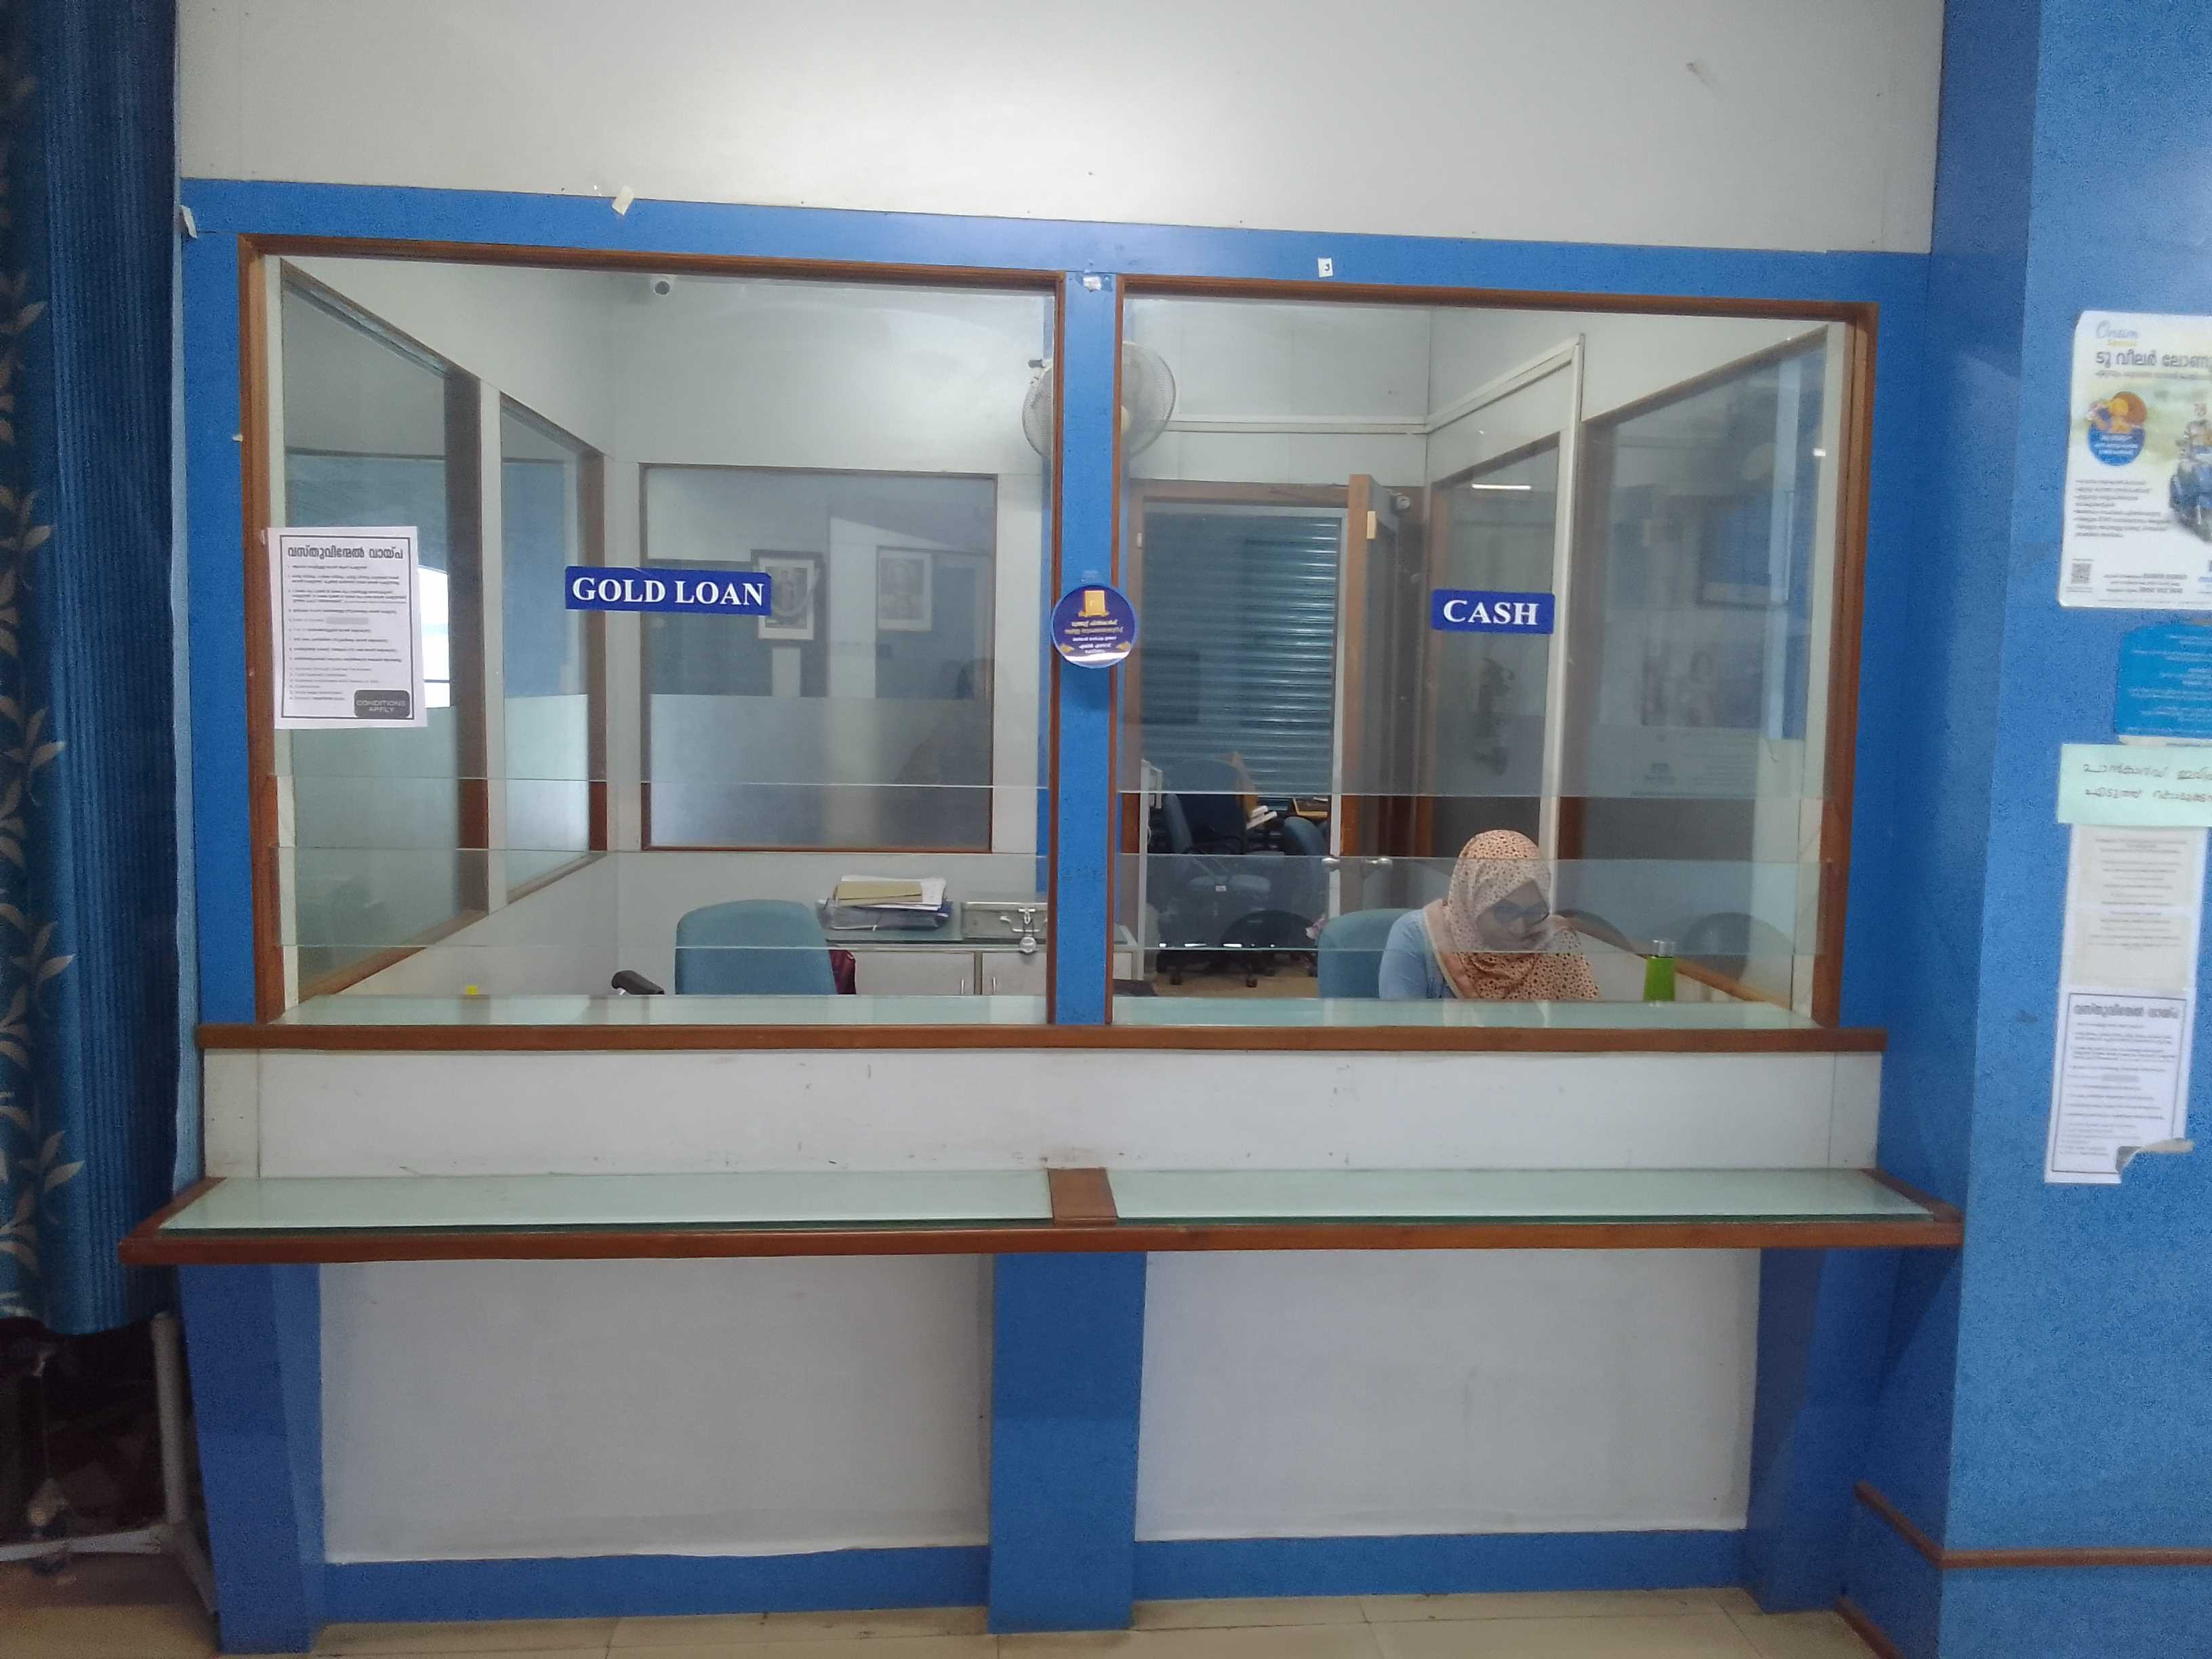 Photos and Videos of Muthoot Fincorp Gold Loan in Down Hill, Malappuram